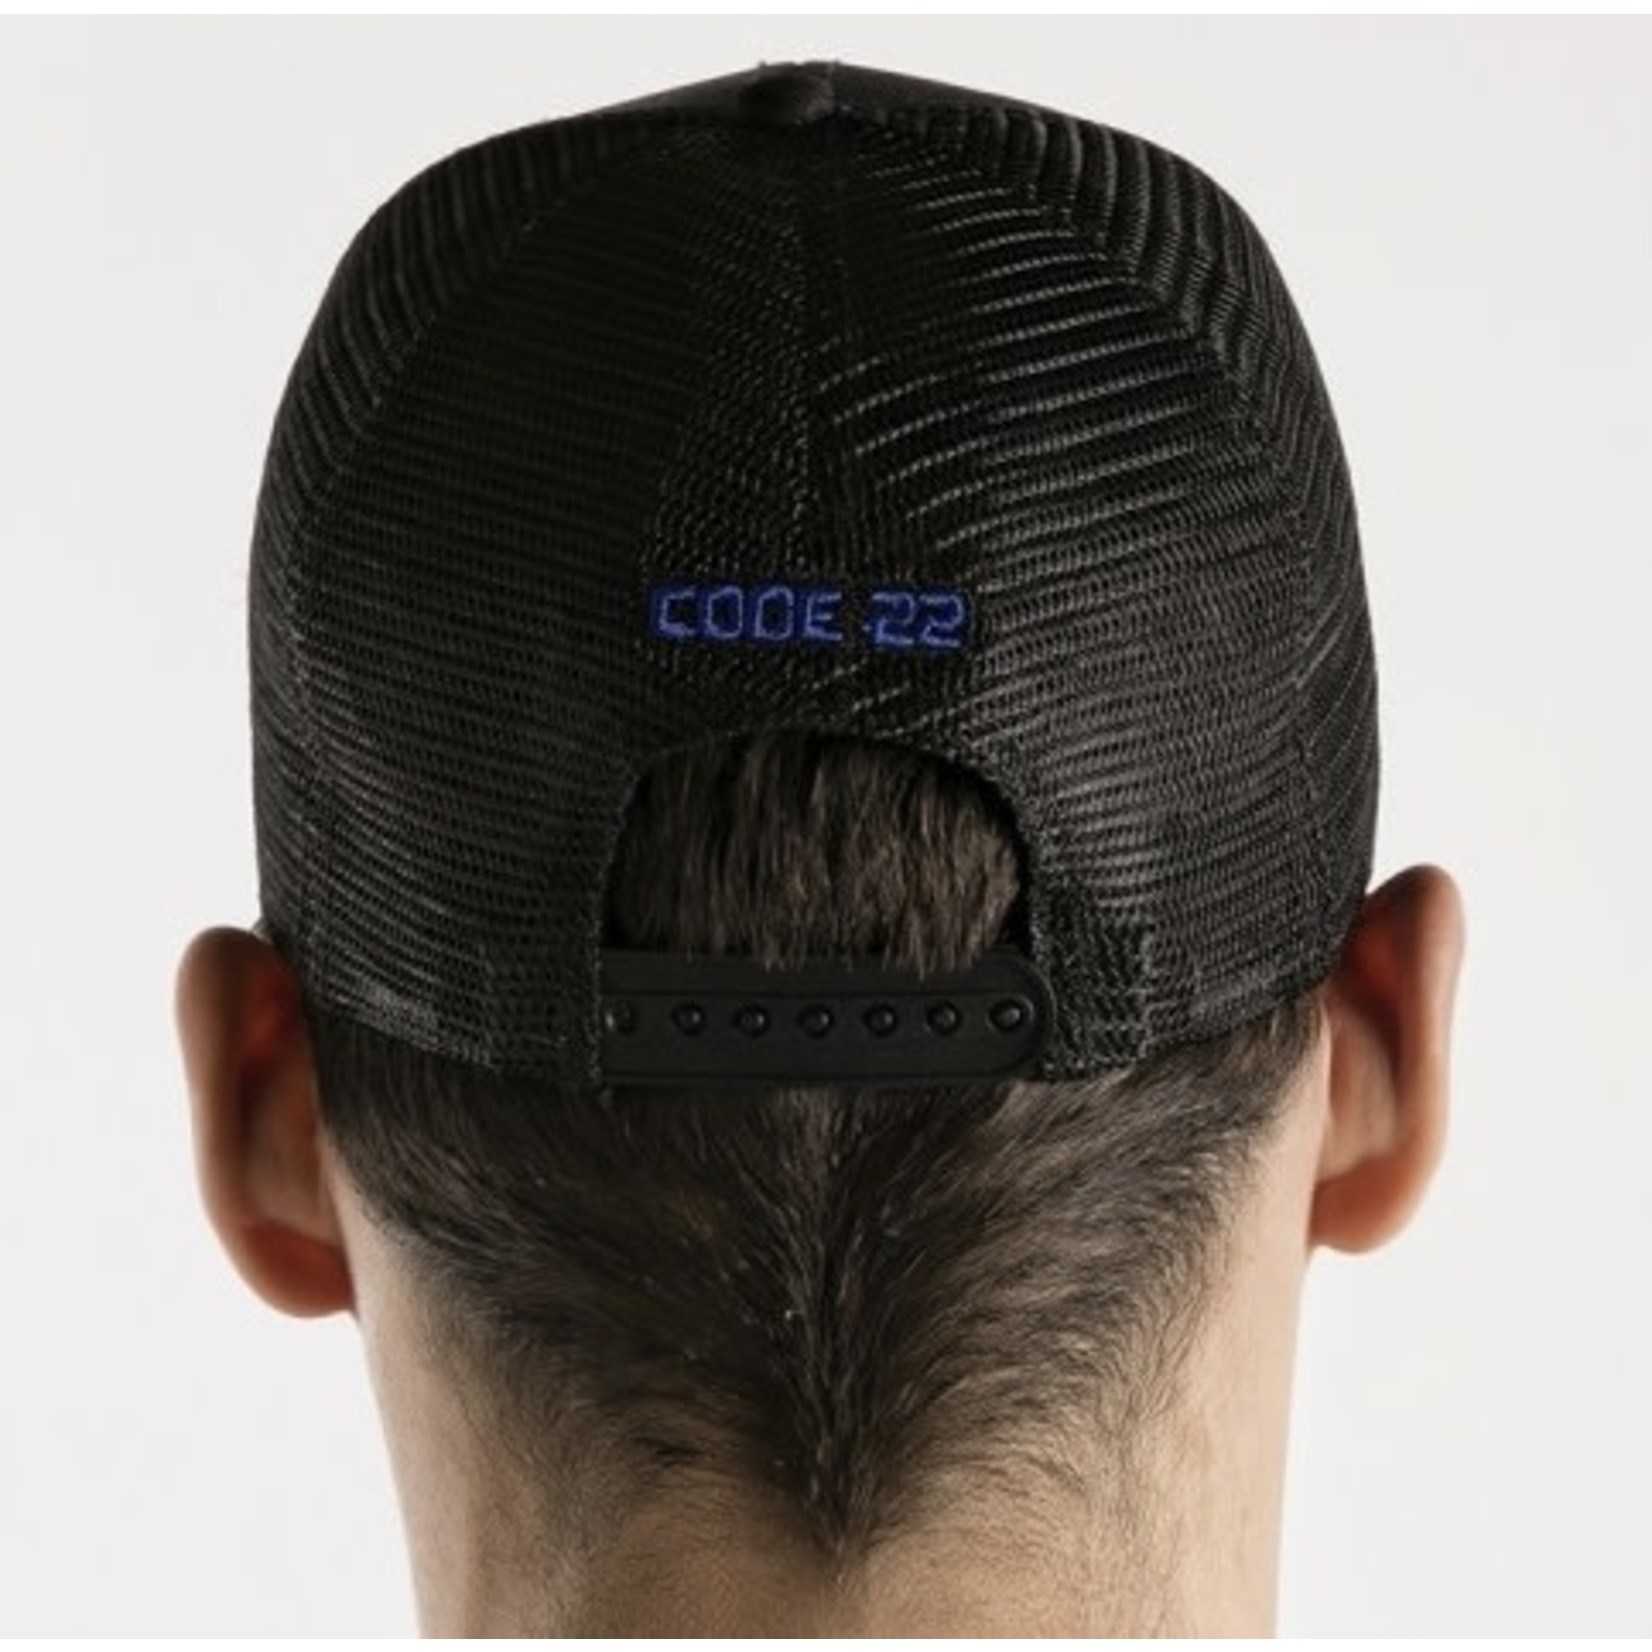 Code 22 CODE 22 - Hat(Black and Blue)